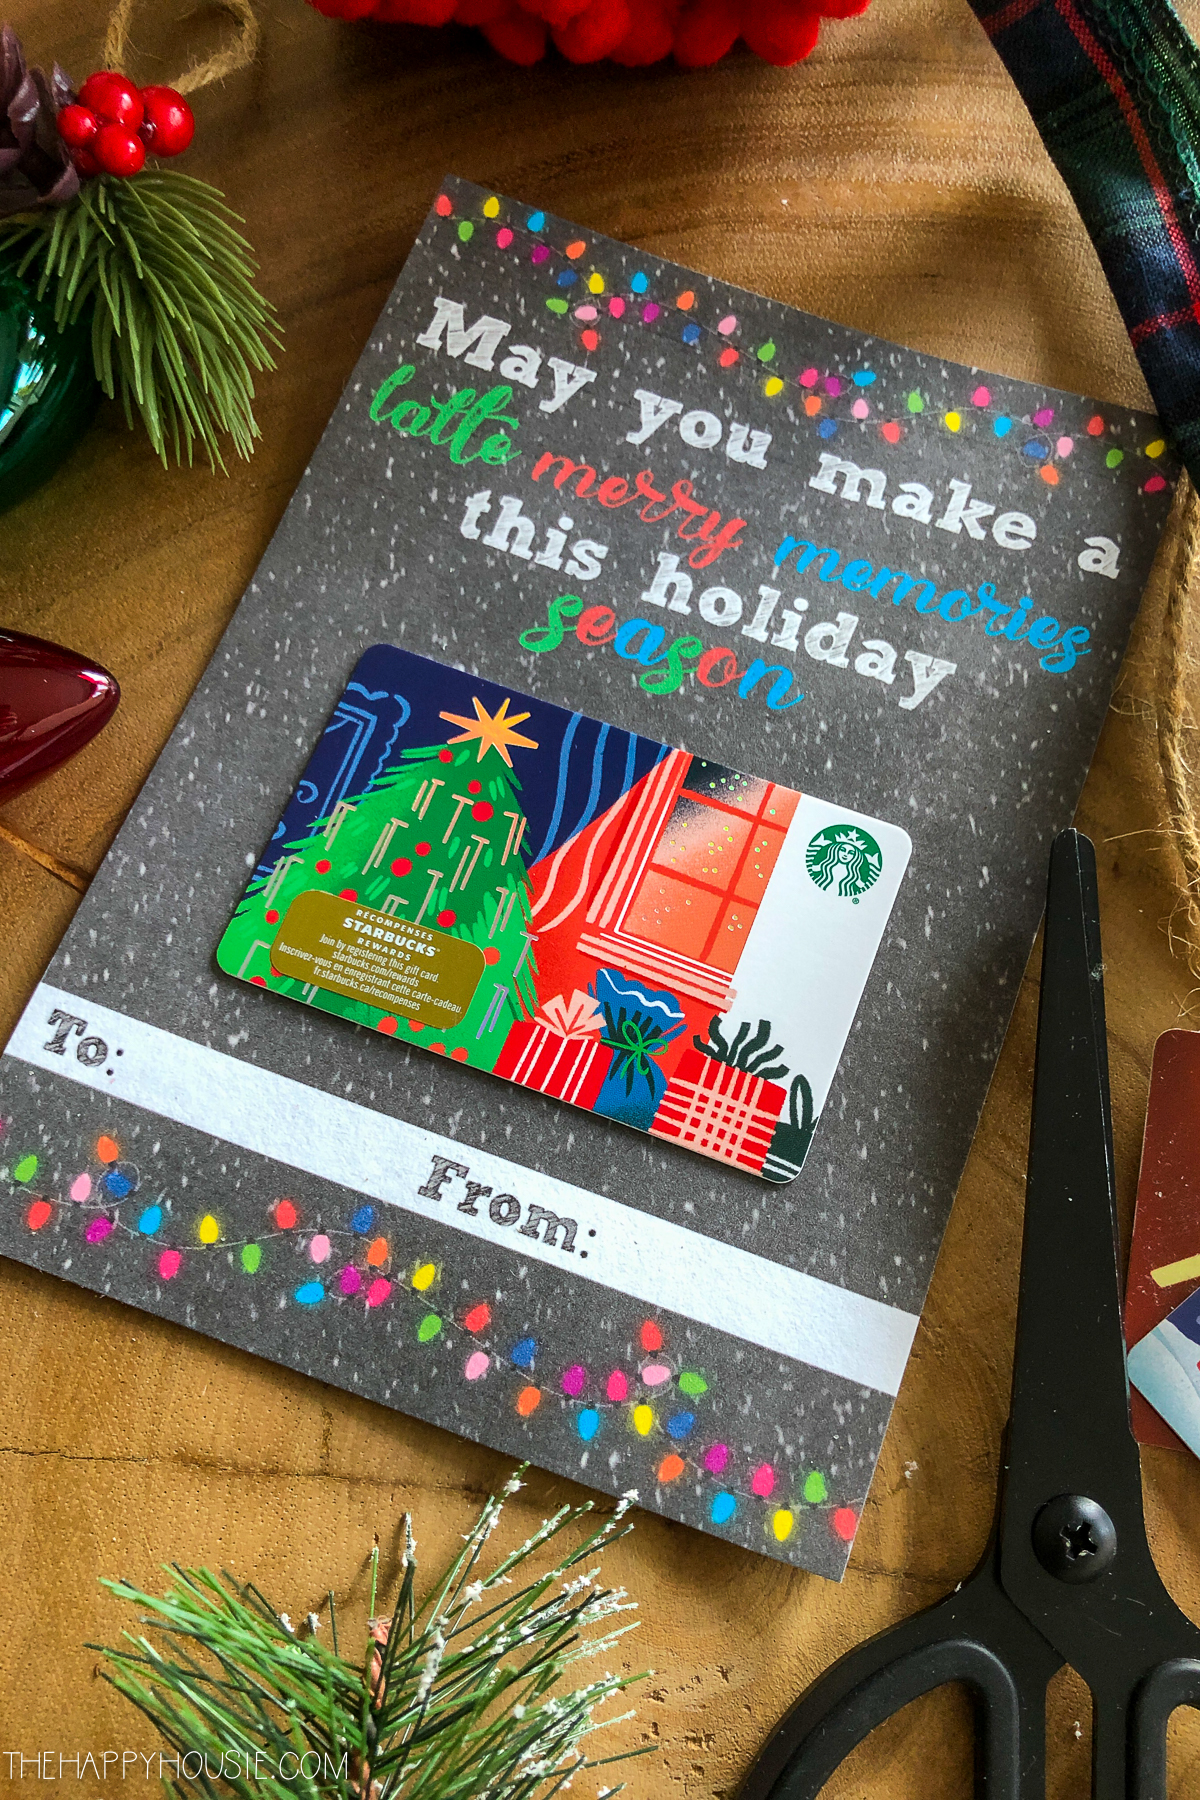 A holiday coffee gift card.